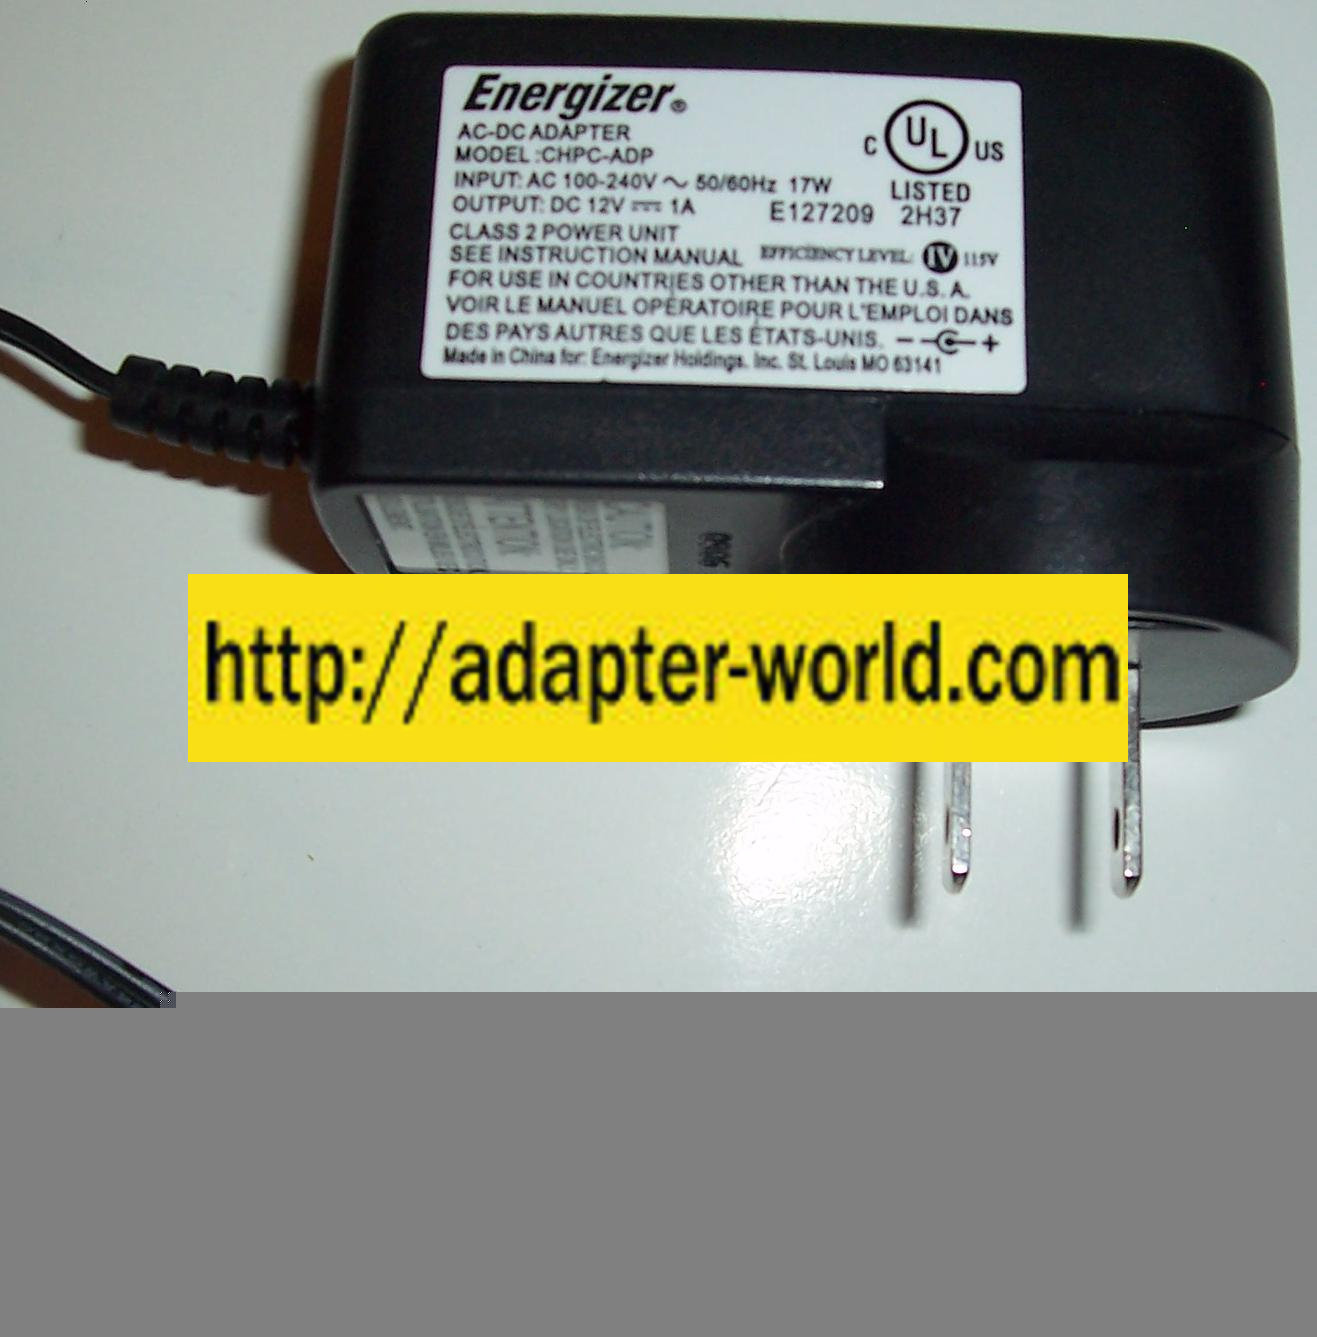 ENERGIZER CHPC-ADP AC DC ADAPTER 12V 1A CLASS 2 POWER SUPPLY